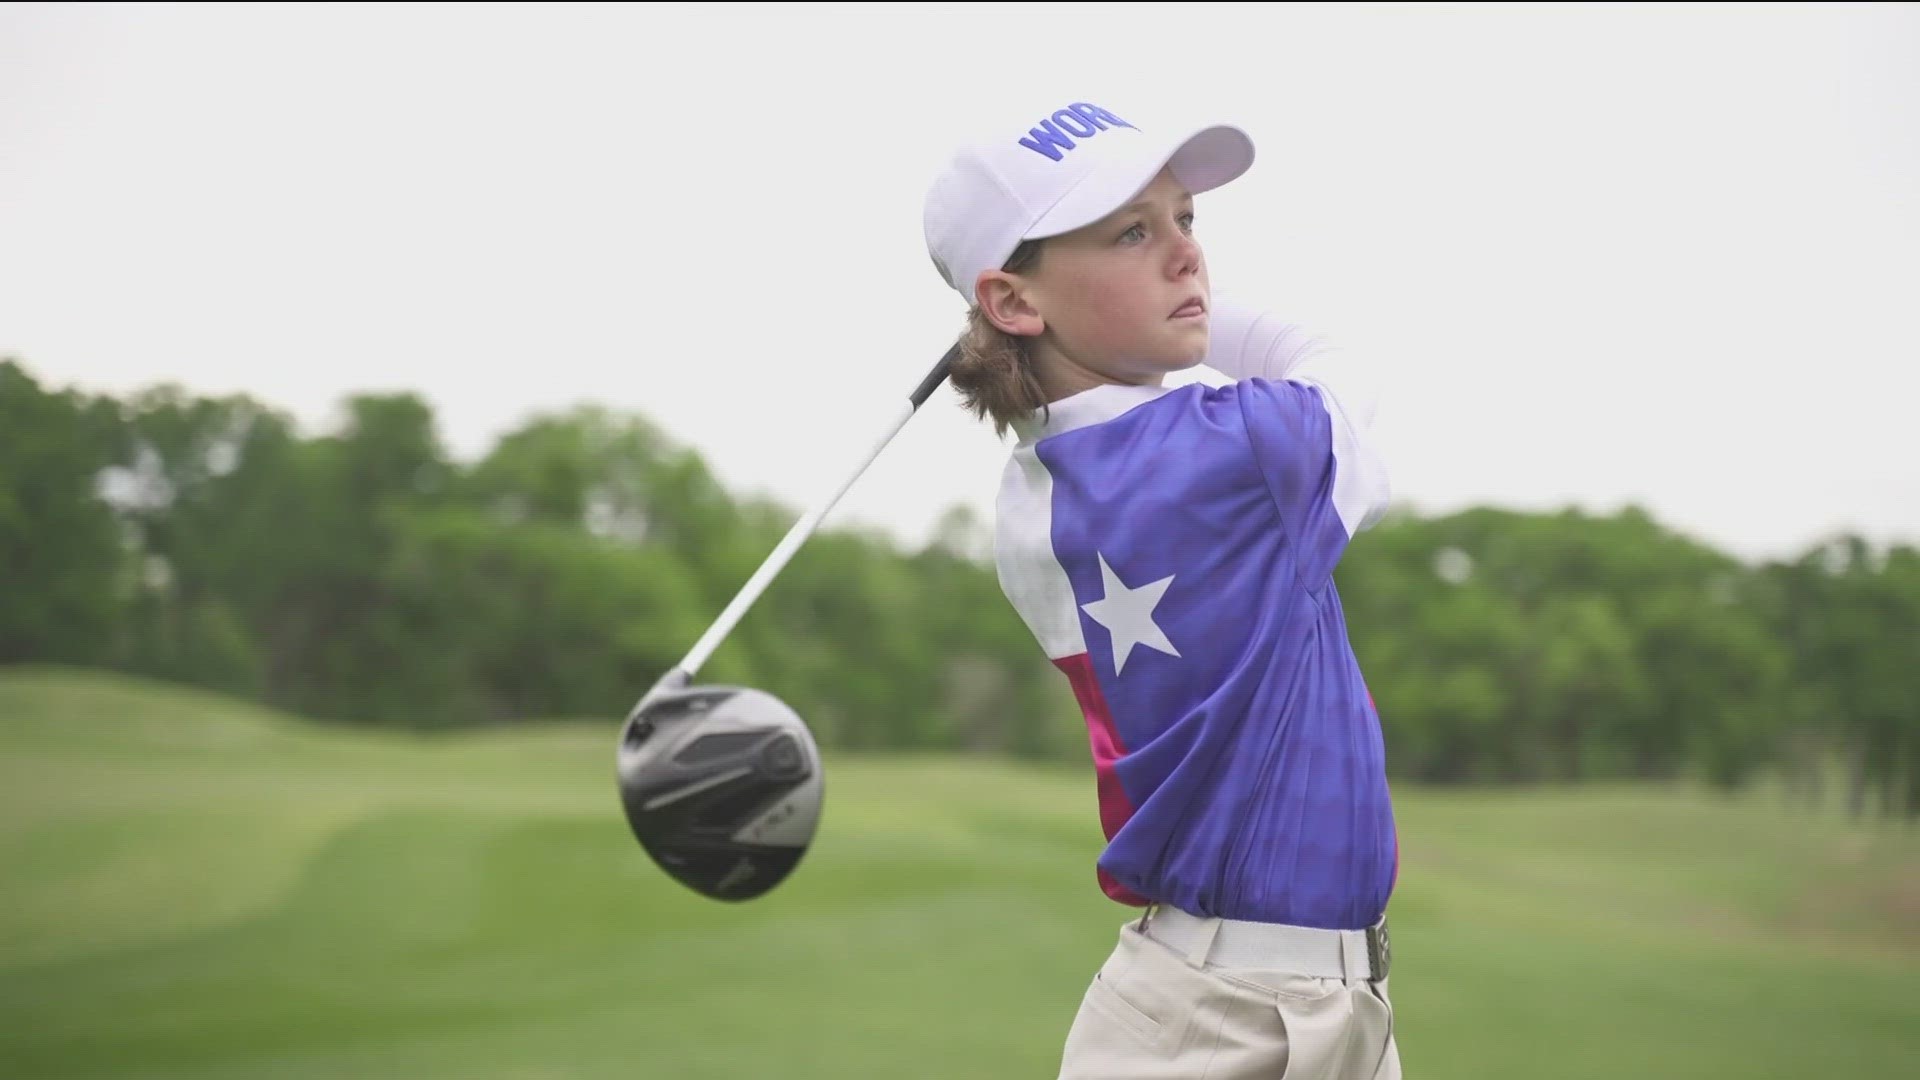 Golfing prodigy Texas Terry won the U.S. Kids Golf World Championship at just 8 years old. Now 11, Texas is headed to Augusta.